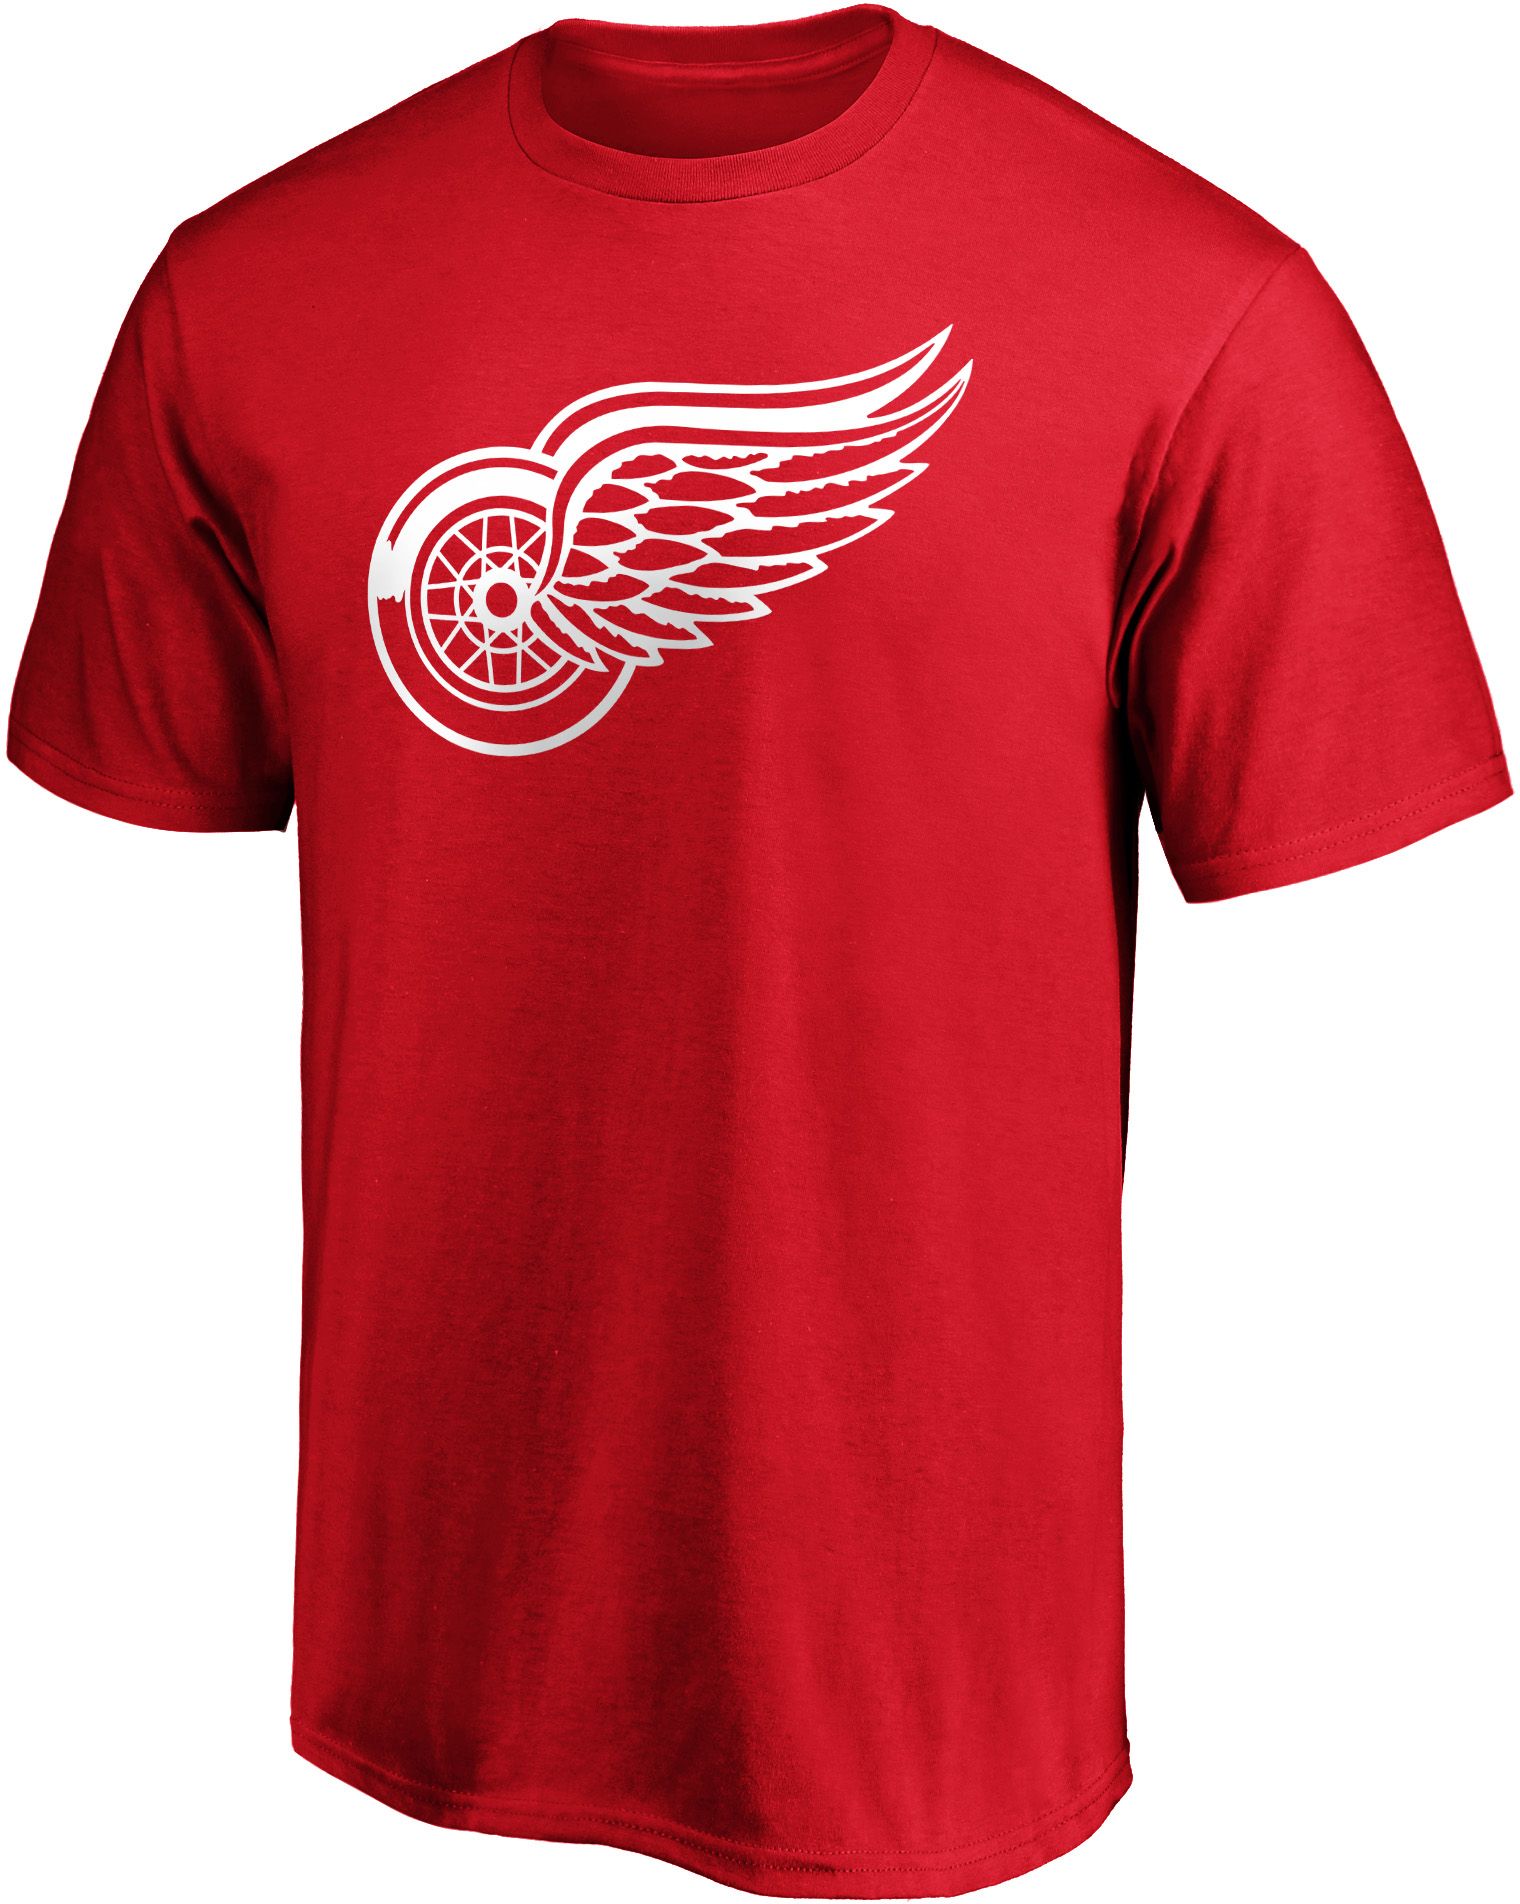 Detroit Red Wings Women's Apparel  Curbside Pickup Available at DICK'S